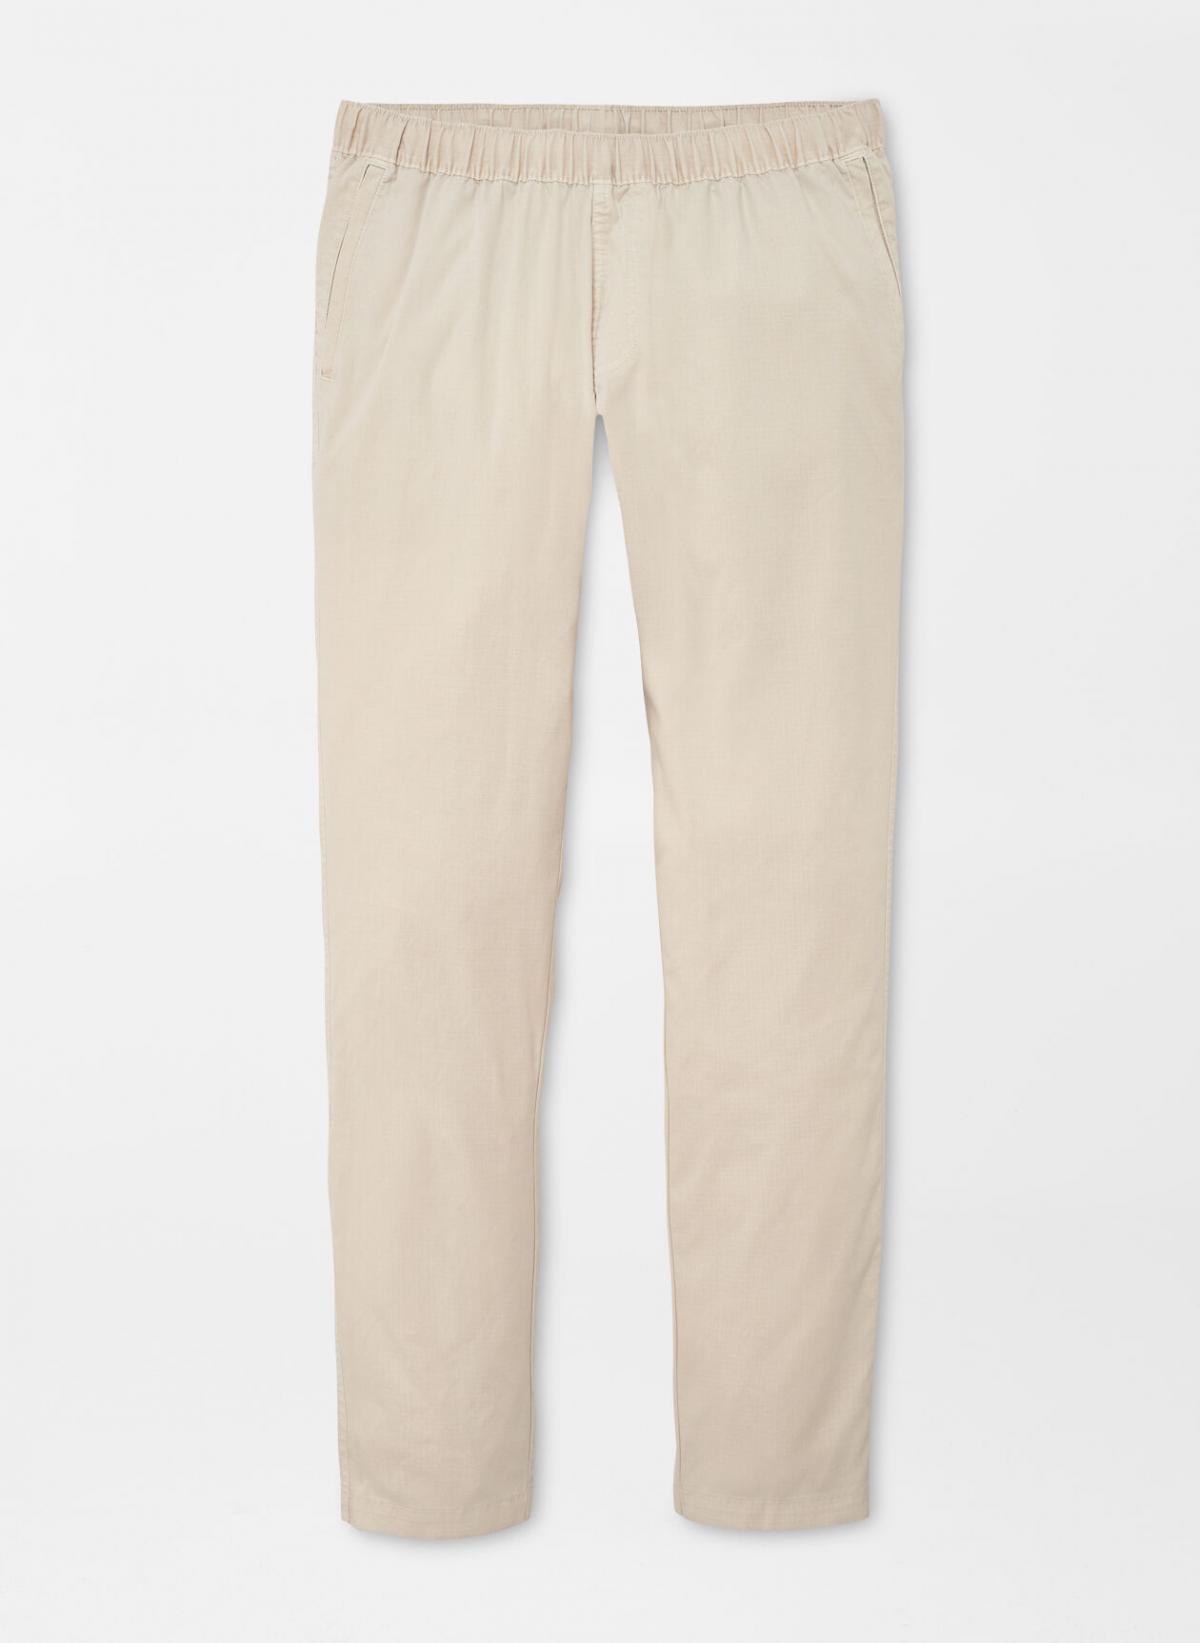 Pants » Peter Millar & Puma Outlet Store ! » JCN Consultant